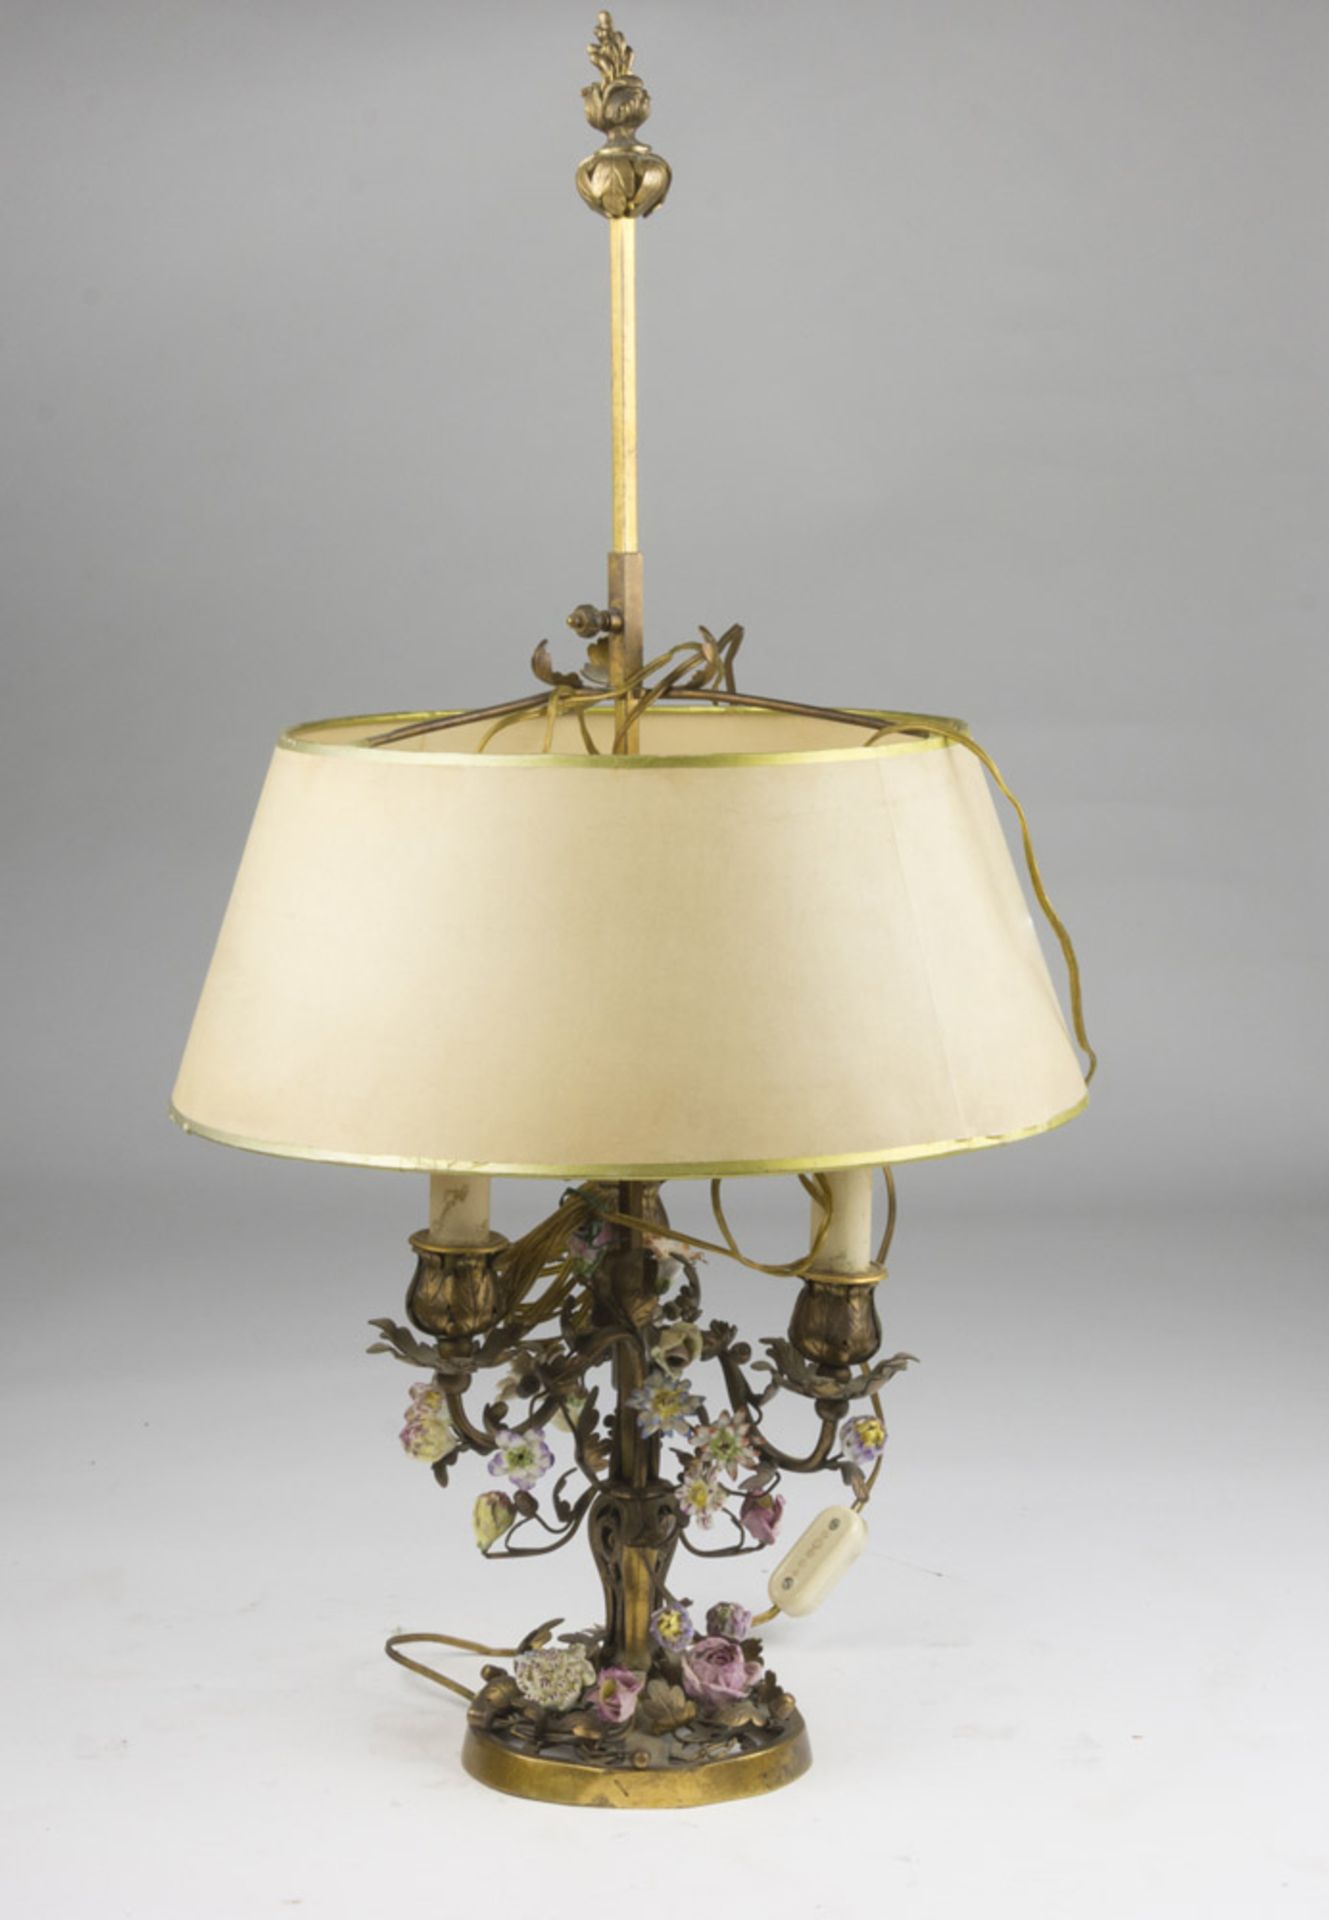 LAMP IN BRONZE AND PORCELAIN 19TH CENTURY with stem and arma of ramages with flowers and leaves.